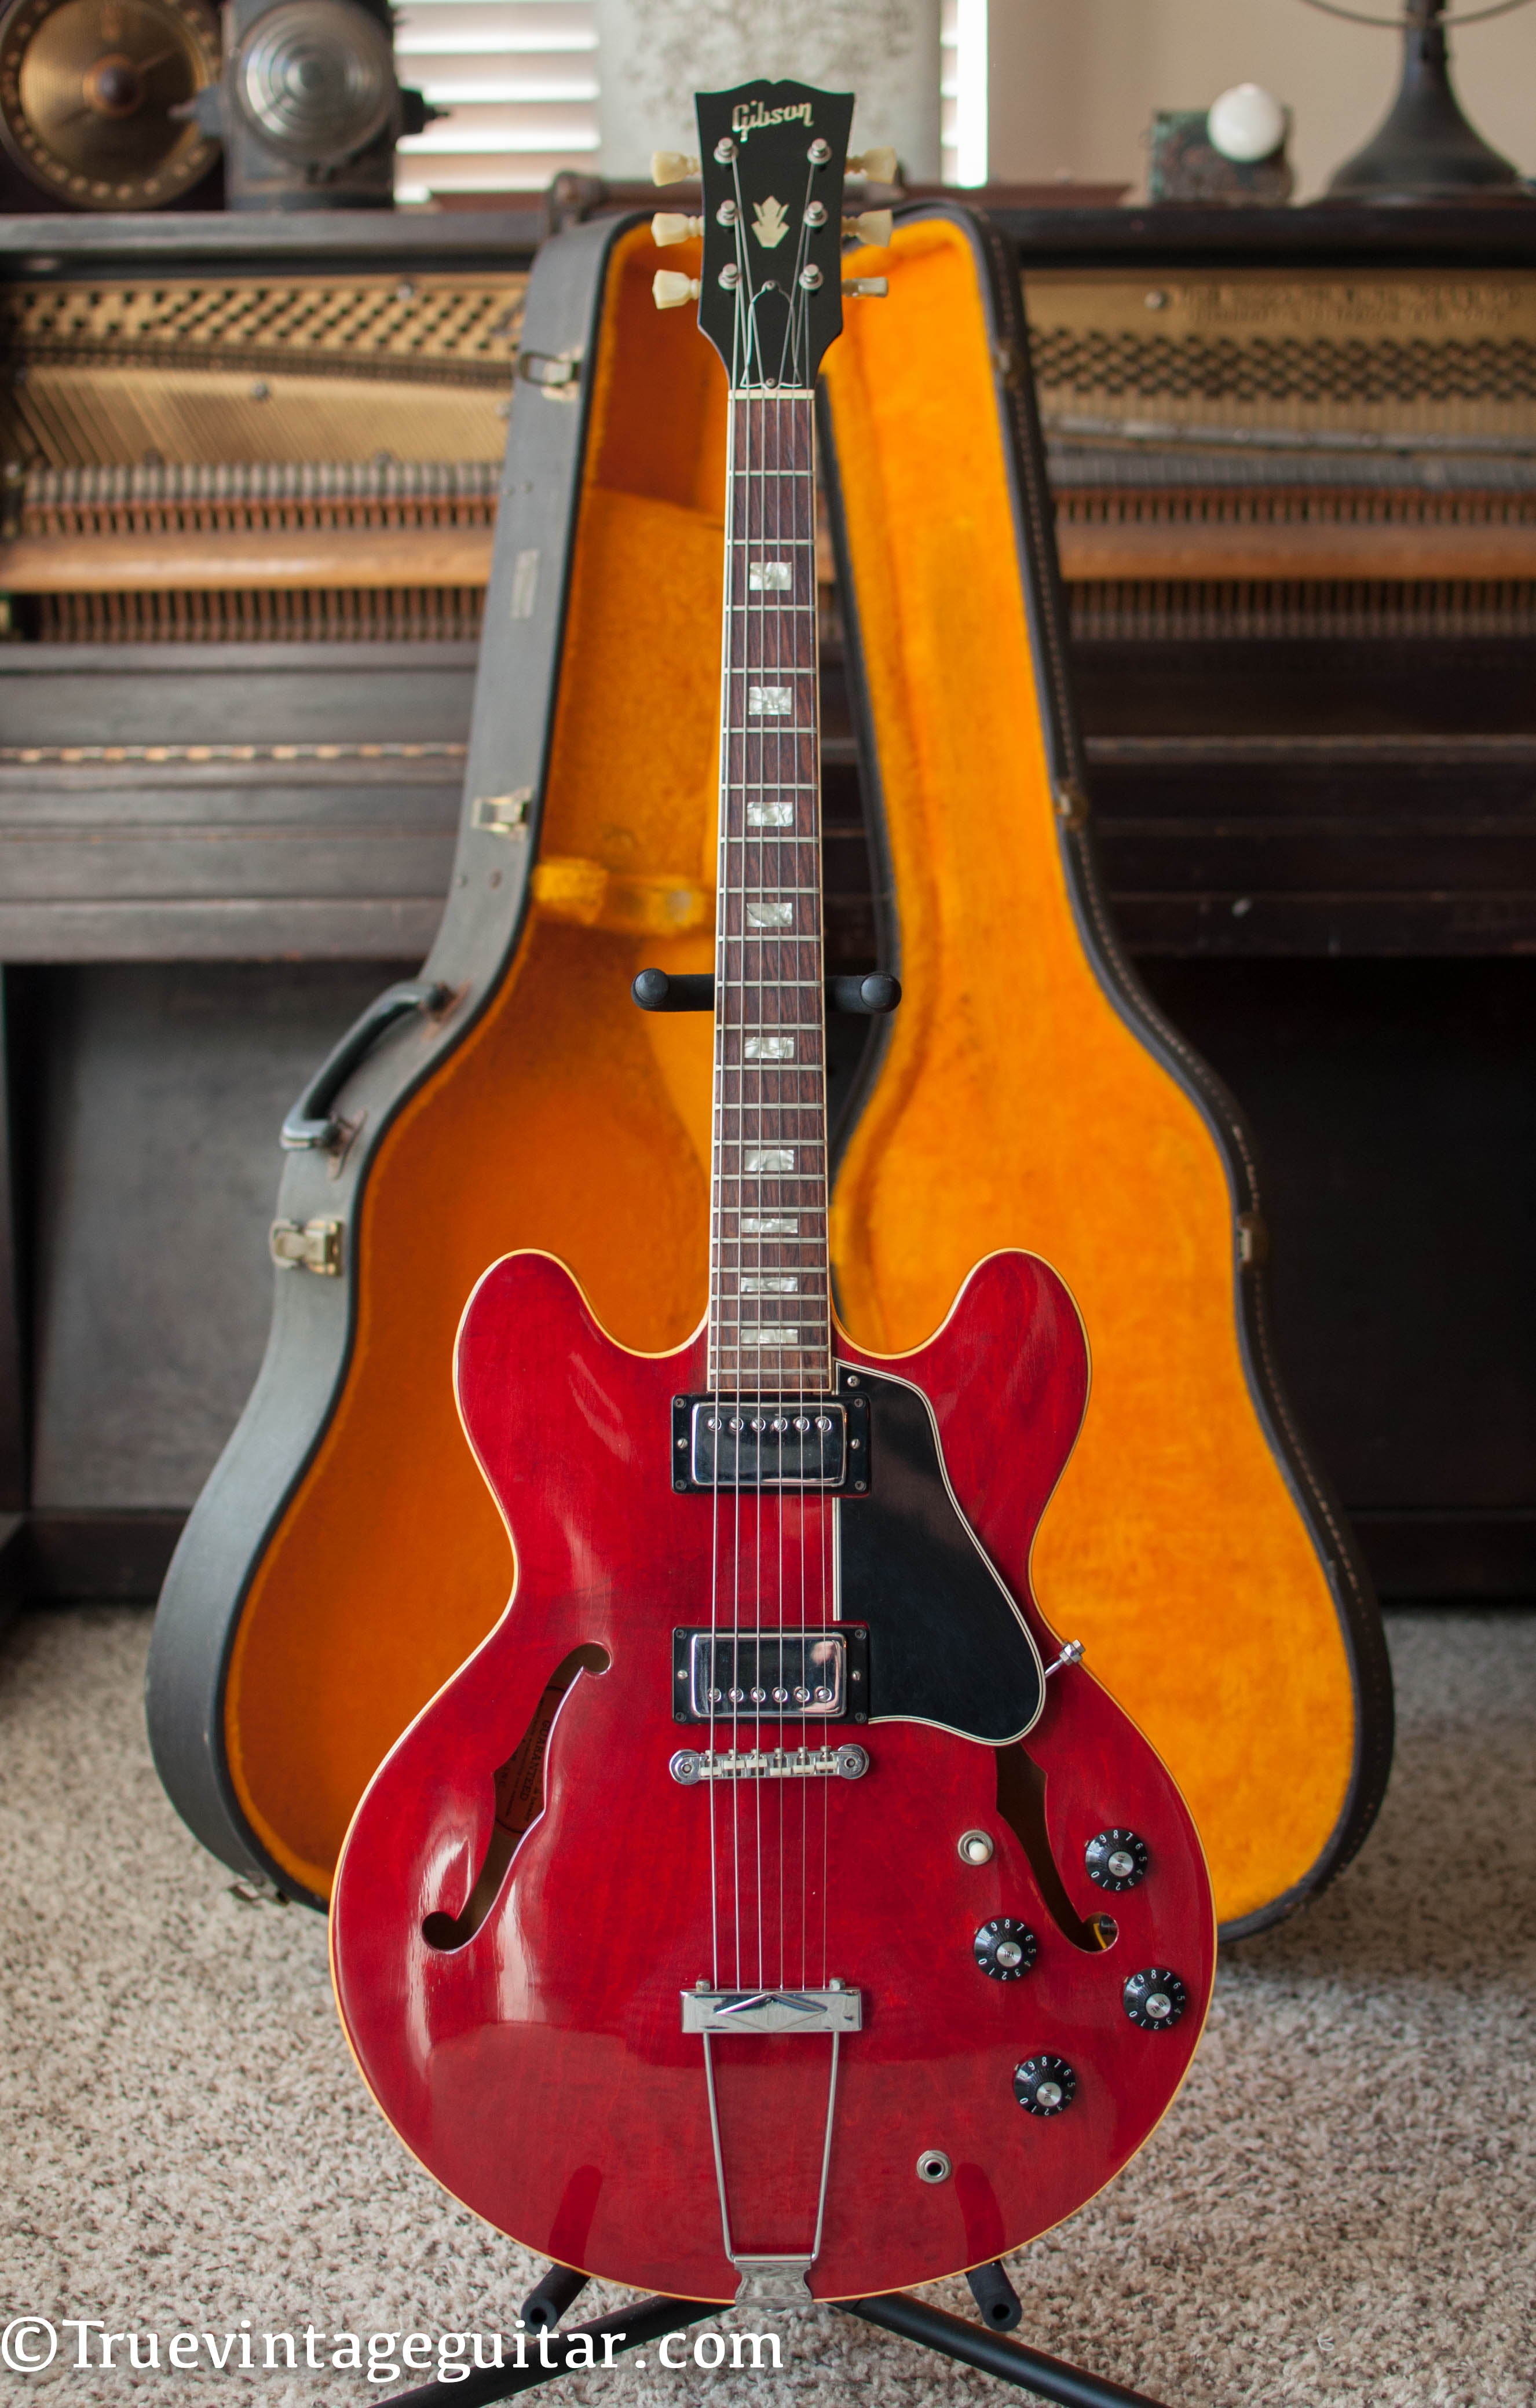 Vintage 1967 Gibson ES-335 Cherry red electric guitar